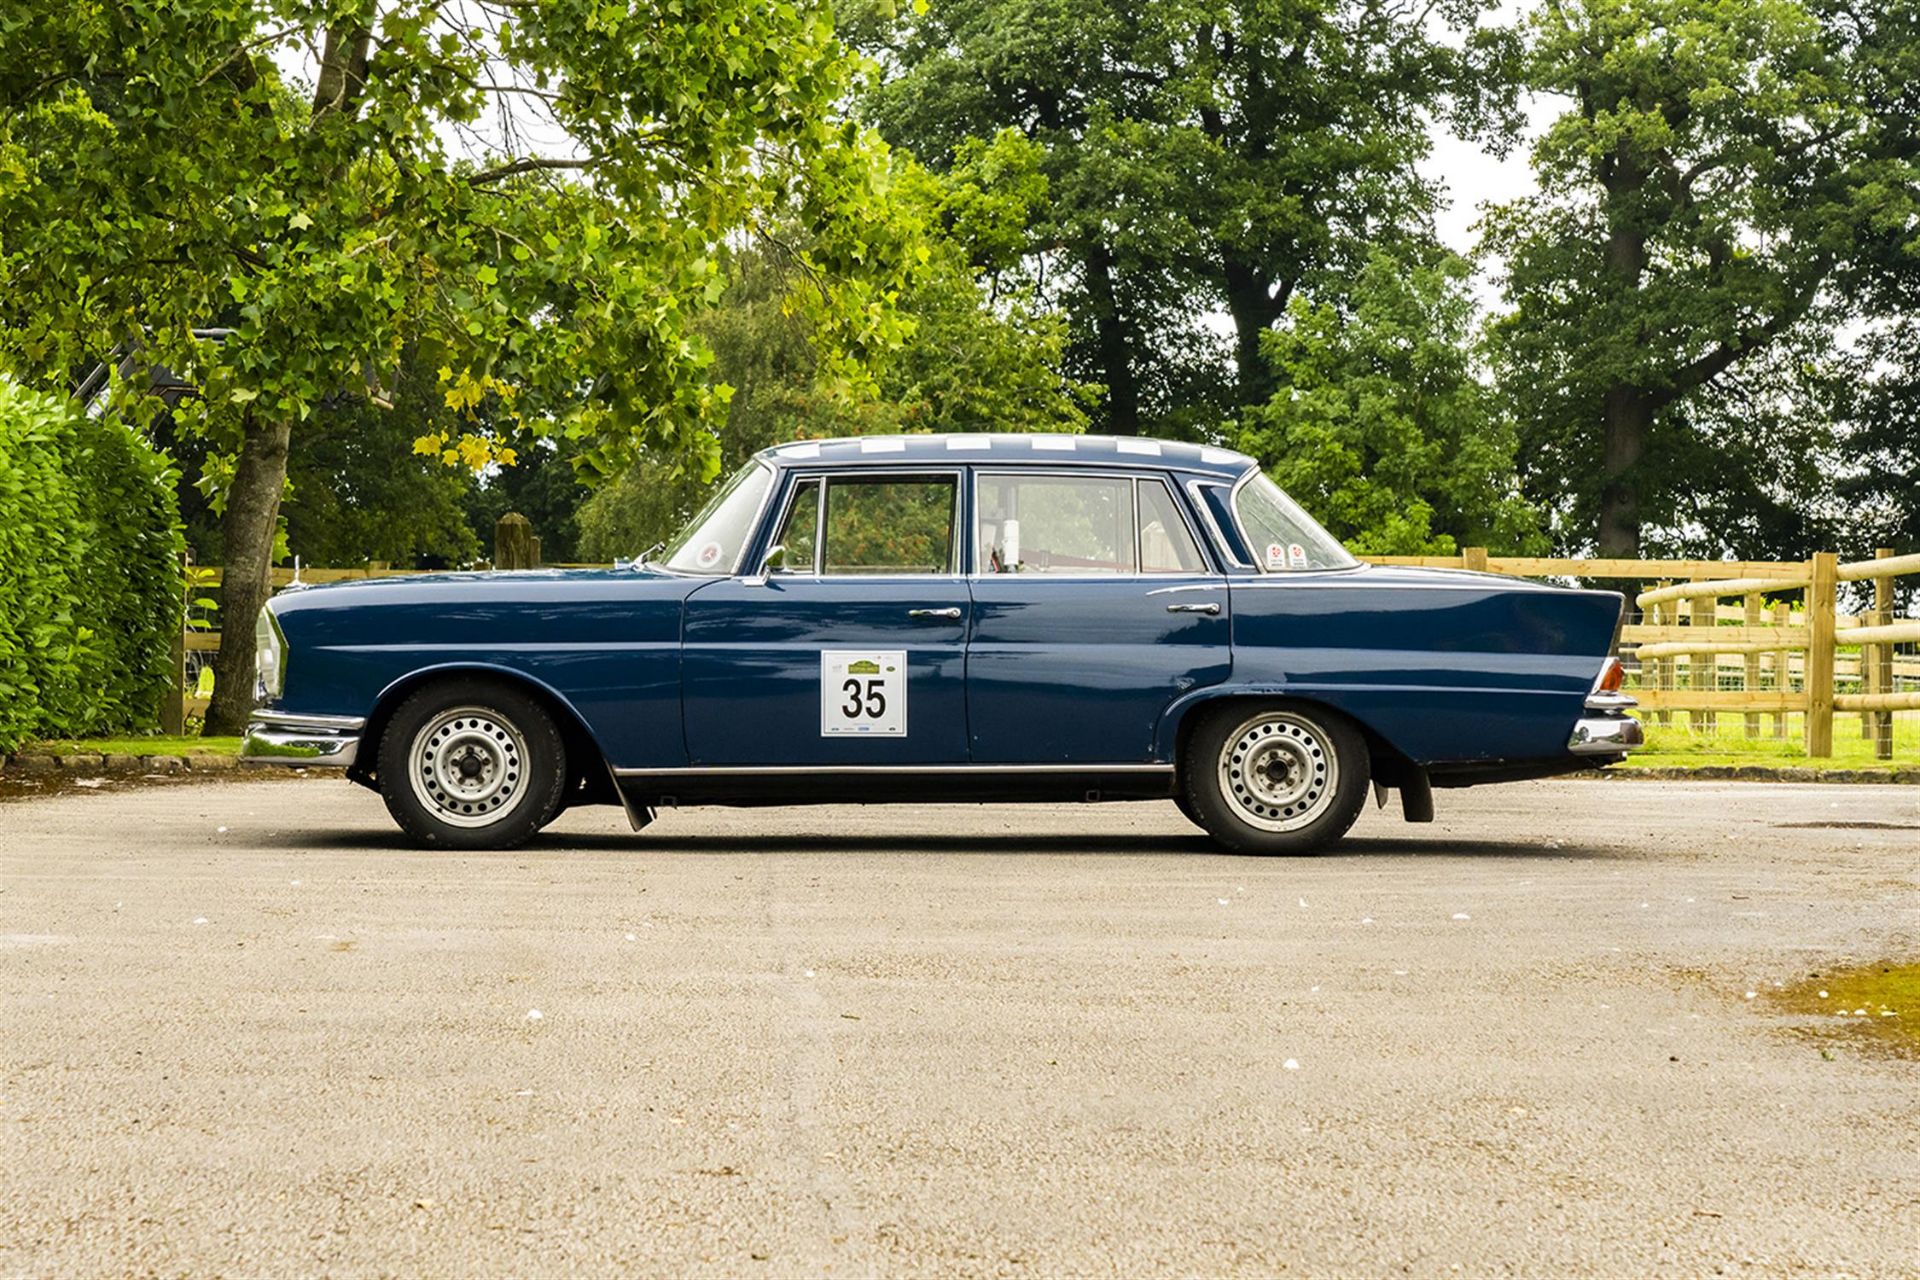 1964 Mercedes-Benz 220SE Fintail Historic Rally Car (W111) - Image 5 of 10